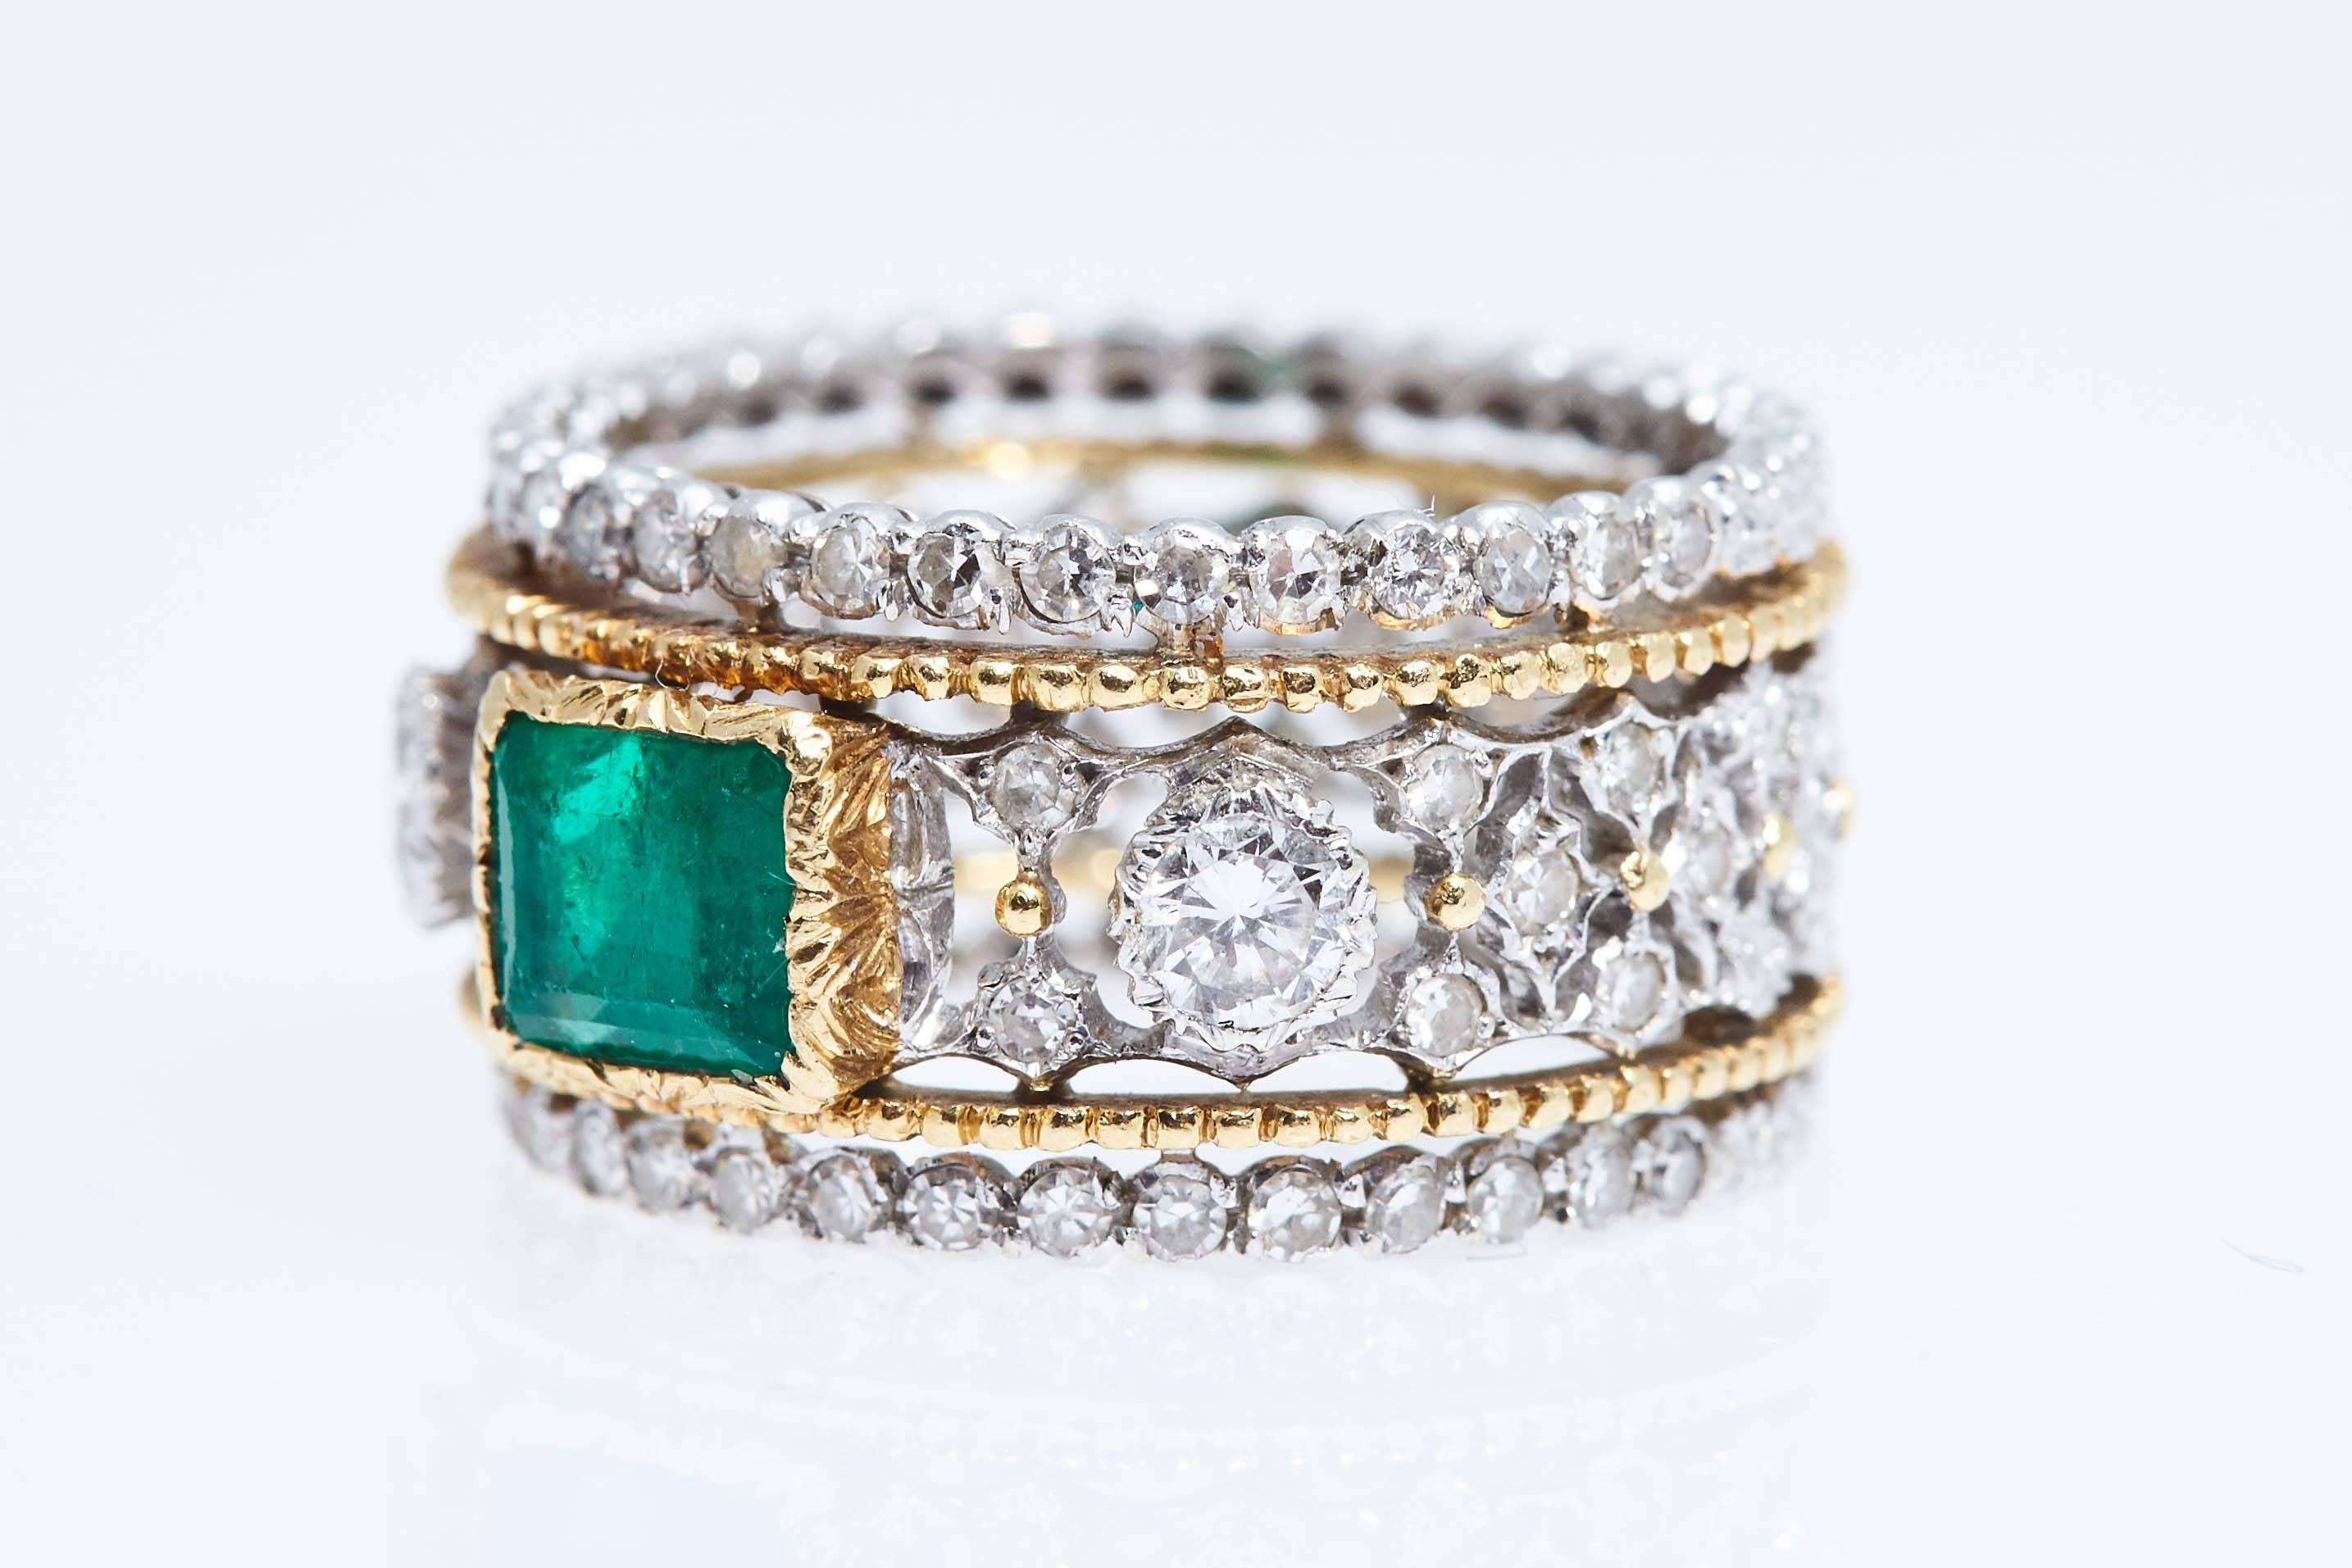 Buccellati emerald and diamond 18 karat gold and silver ring.  The rectangular emerald weighs approximately .70 carat and the diamonds weigh a total of approximately .30 carat. The ring is approximately 11mm. wide and finger size 6 1/4. It is